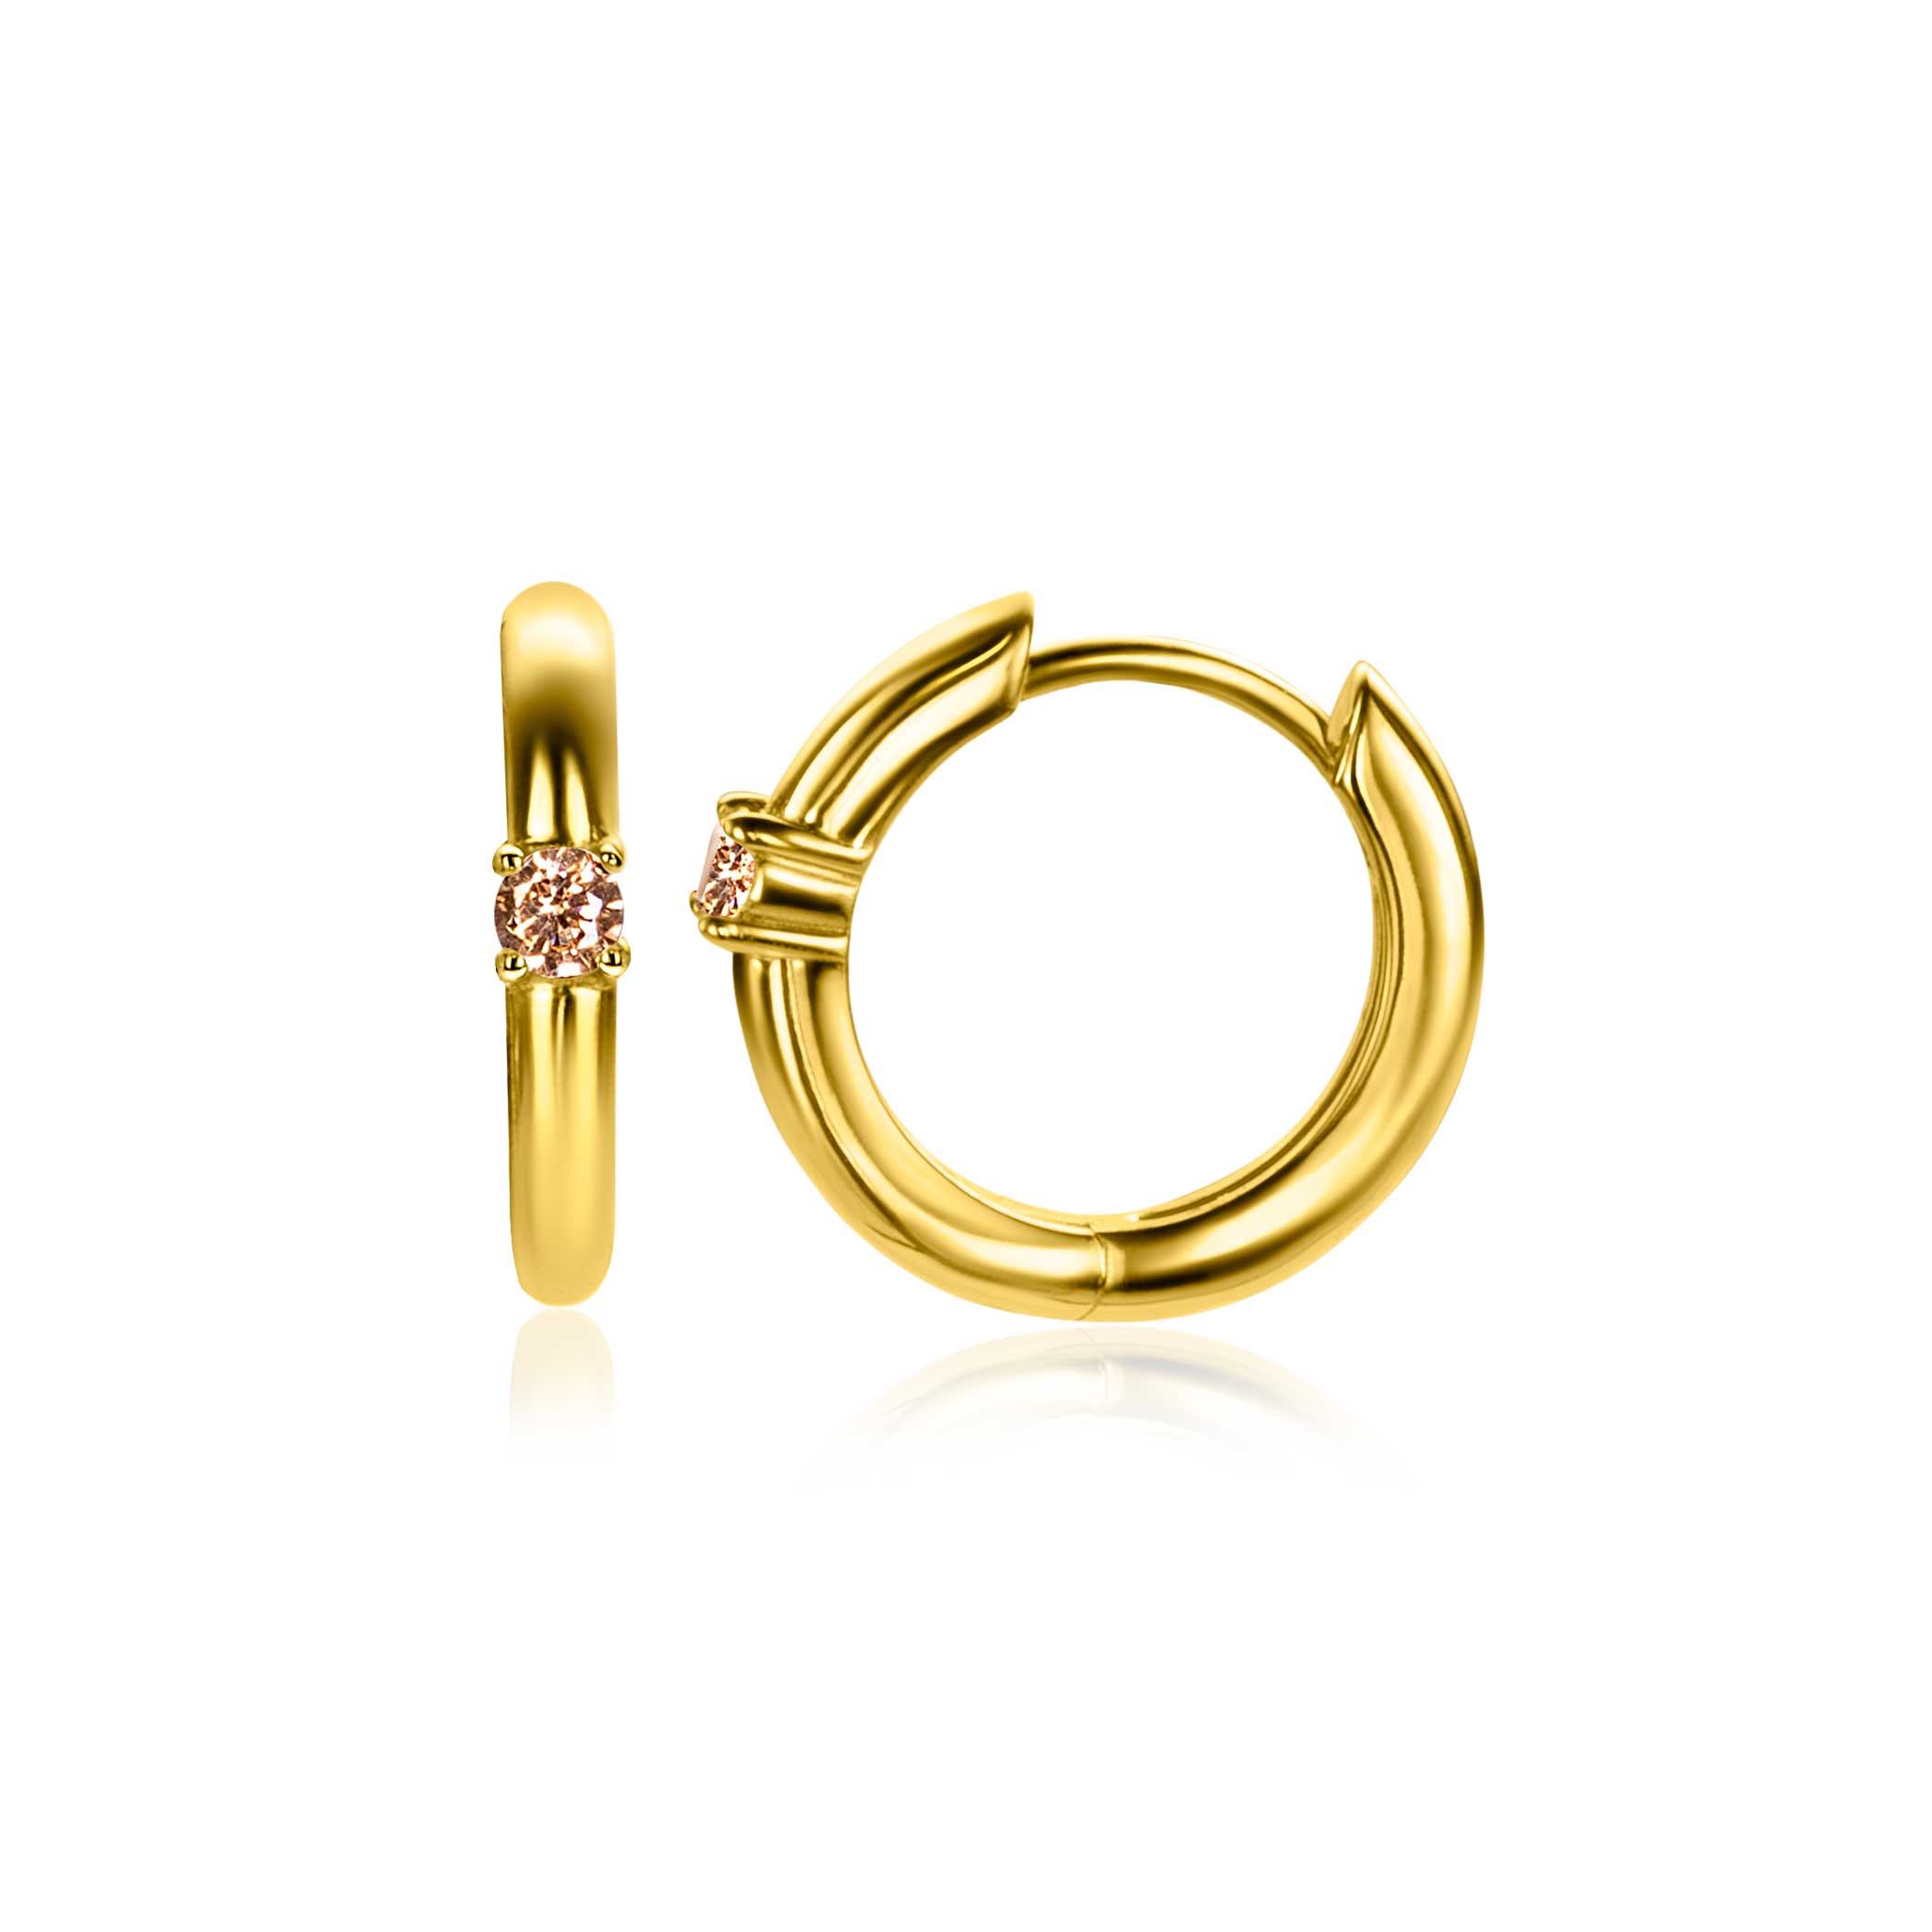 NOVEMBER Hoop Earrings 13mm Gold Plated with Birthstone Yellow Citrine Zirconia